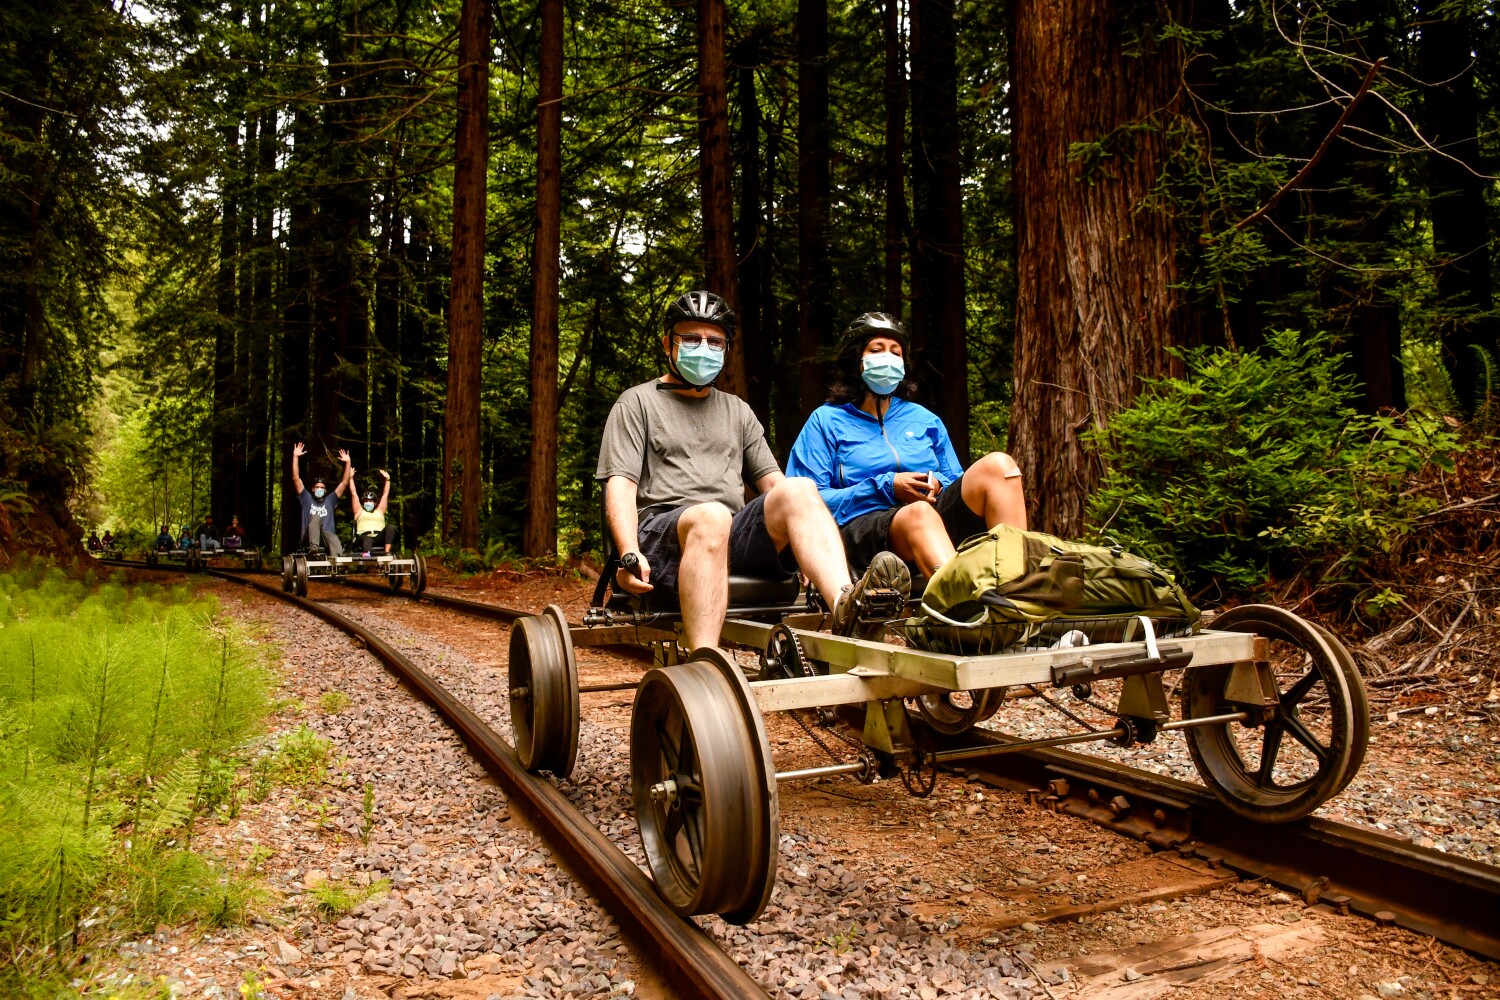 A bucket list trip: Pedal through a Northern California forest on old railroad tracks